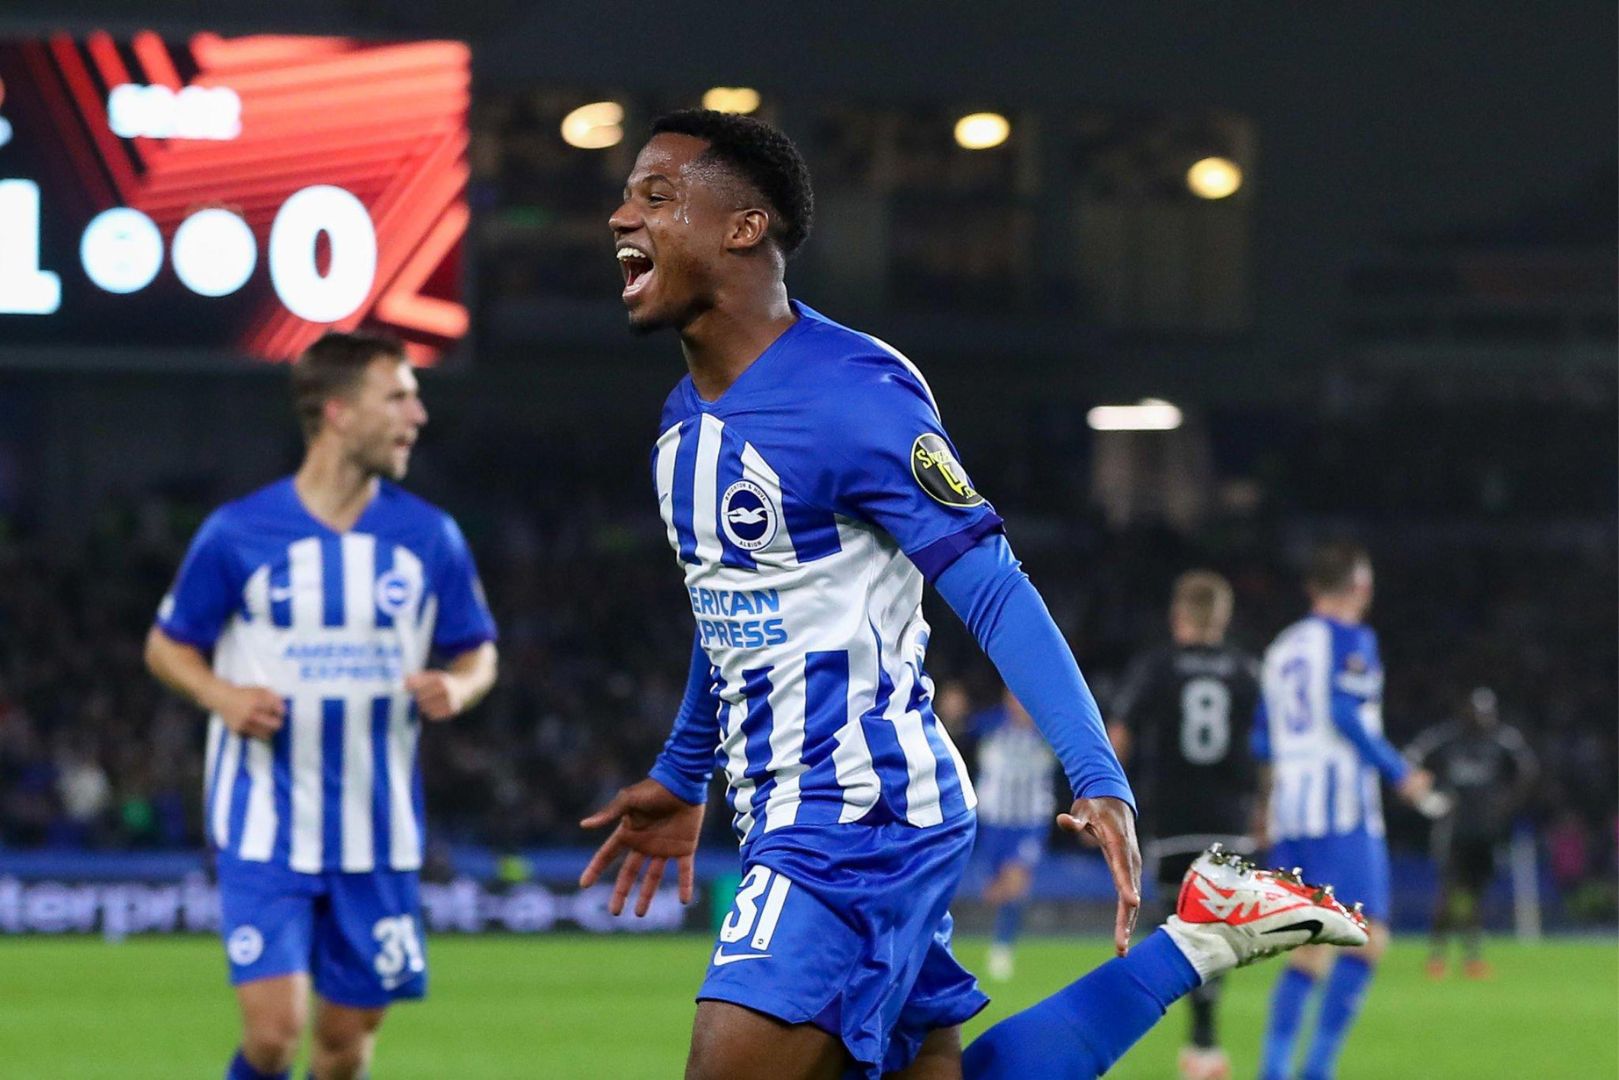 BRIGHTON, ENGLAND - OCTOBER 26: Barcelona loanee Ansu Fati who is currently playing for Brighton & Hove Albion FC on a season long loan celebrates after scoring his team's second goal during the UEFA Europa League 2023/24 match between Brighton & Hove Albion and AFC Ajax at American Express Community Stadium on October 26, 2023 in Brighton, England.